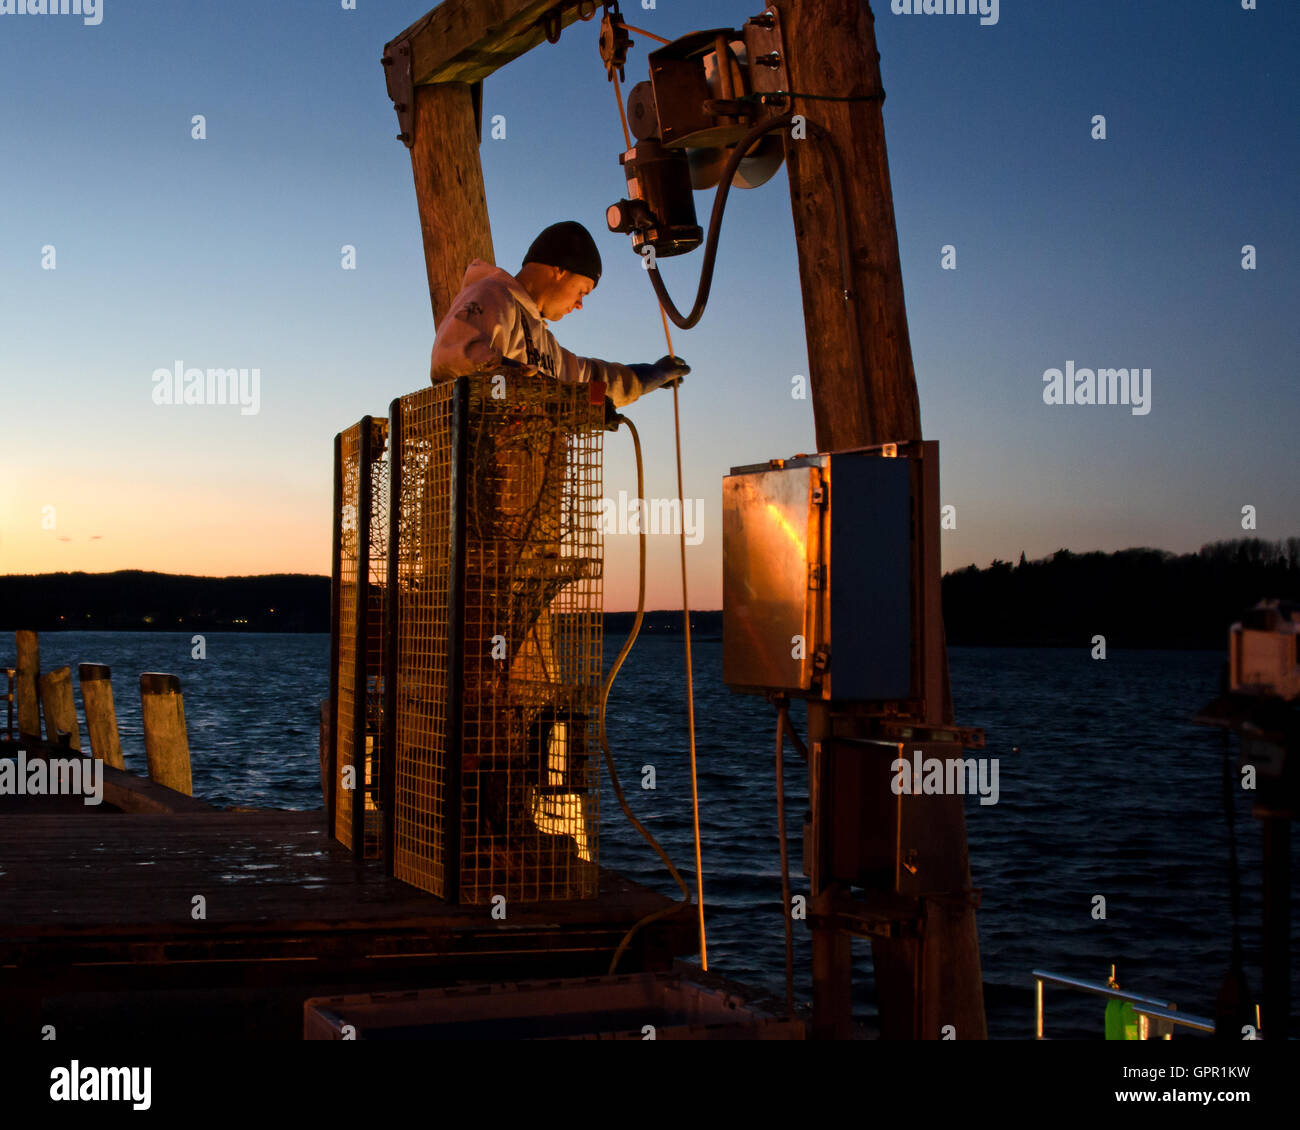 A fisherman unloads his boat at the Town Dock on a December evening in Bar Harbor, Maine. Stock Photo